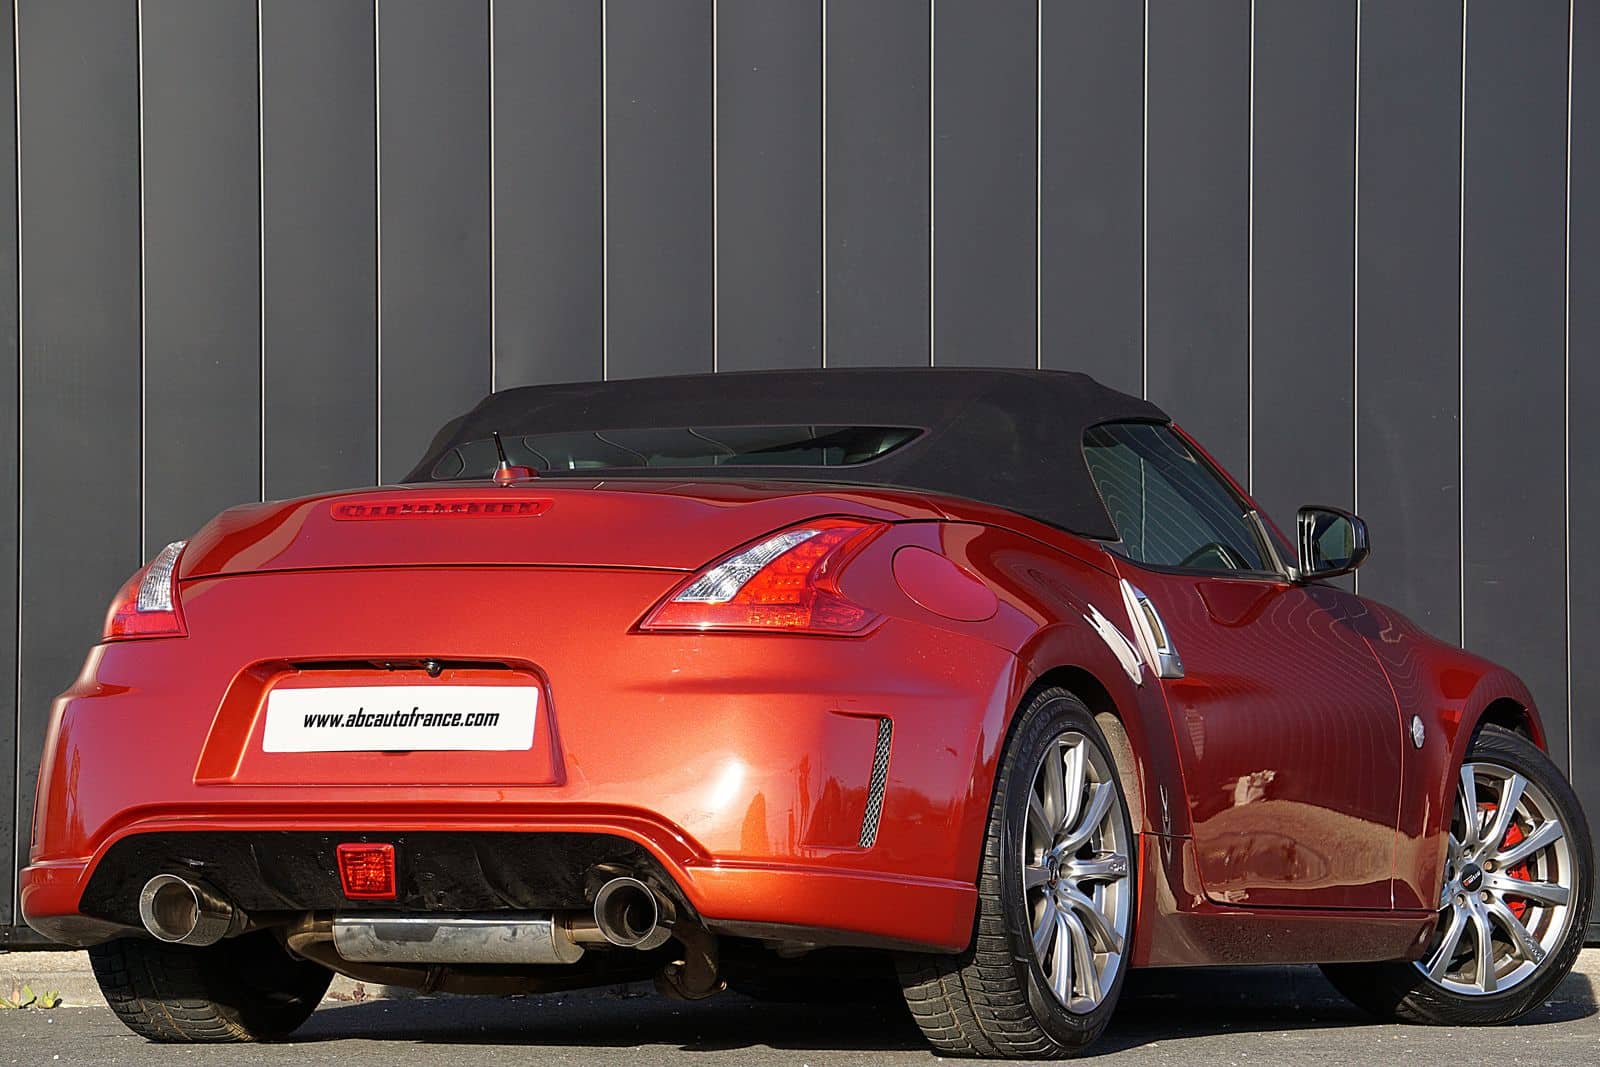 Nissan 370 Z 3.7 V6 Roadster Pack - NISMO Look Occasion 79 abcautofrance (abc auto france) 8